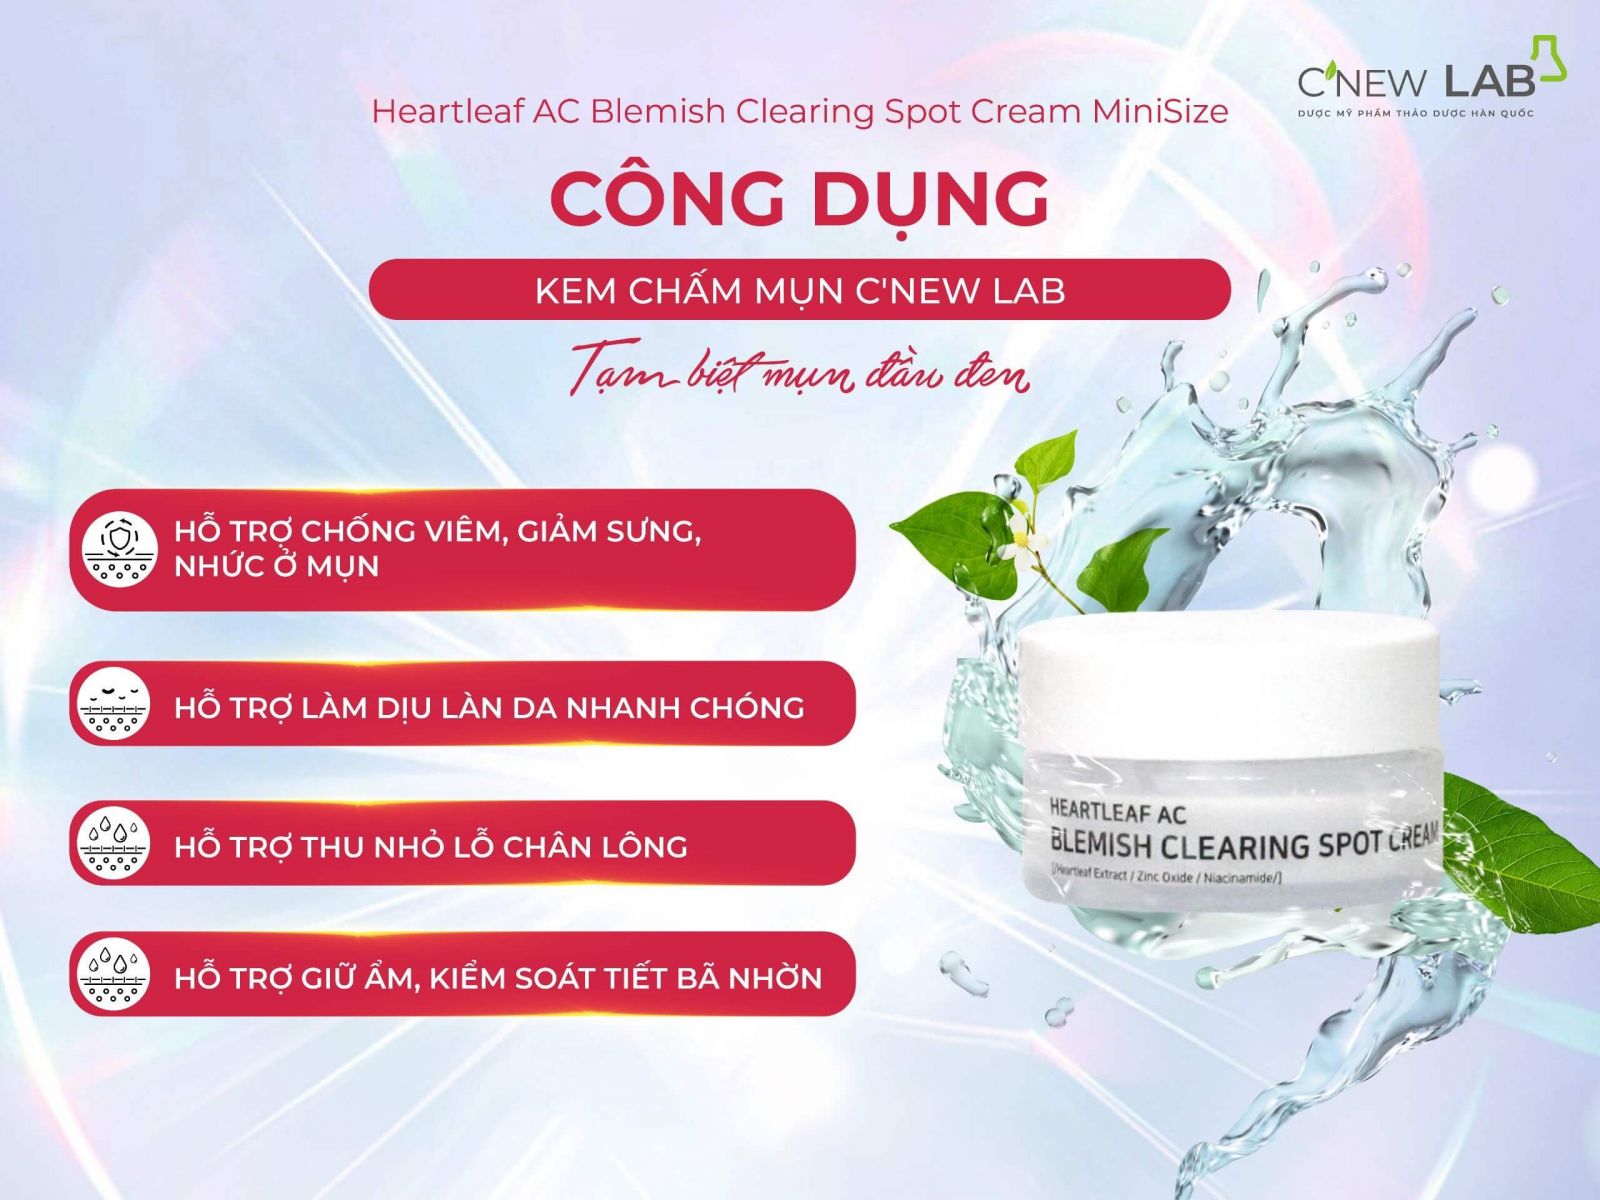 C'New Lab Heartleaf AC Blemish Clearing Spot Cream MiniSize